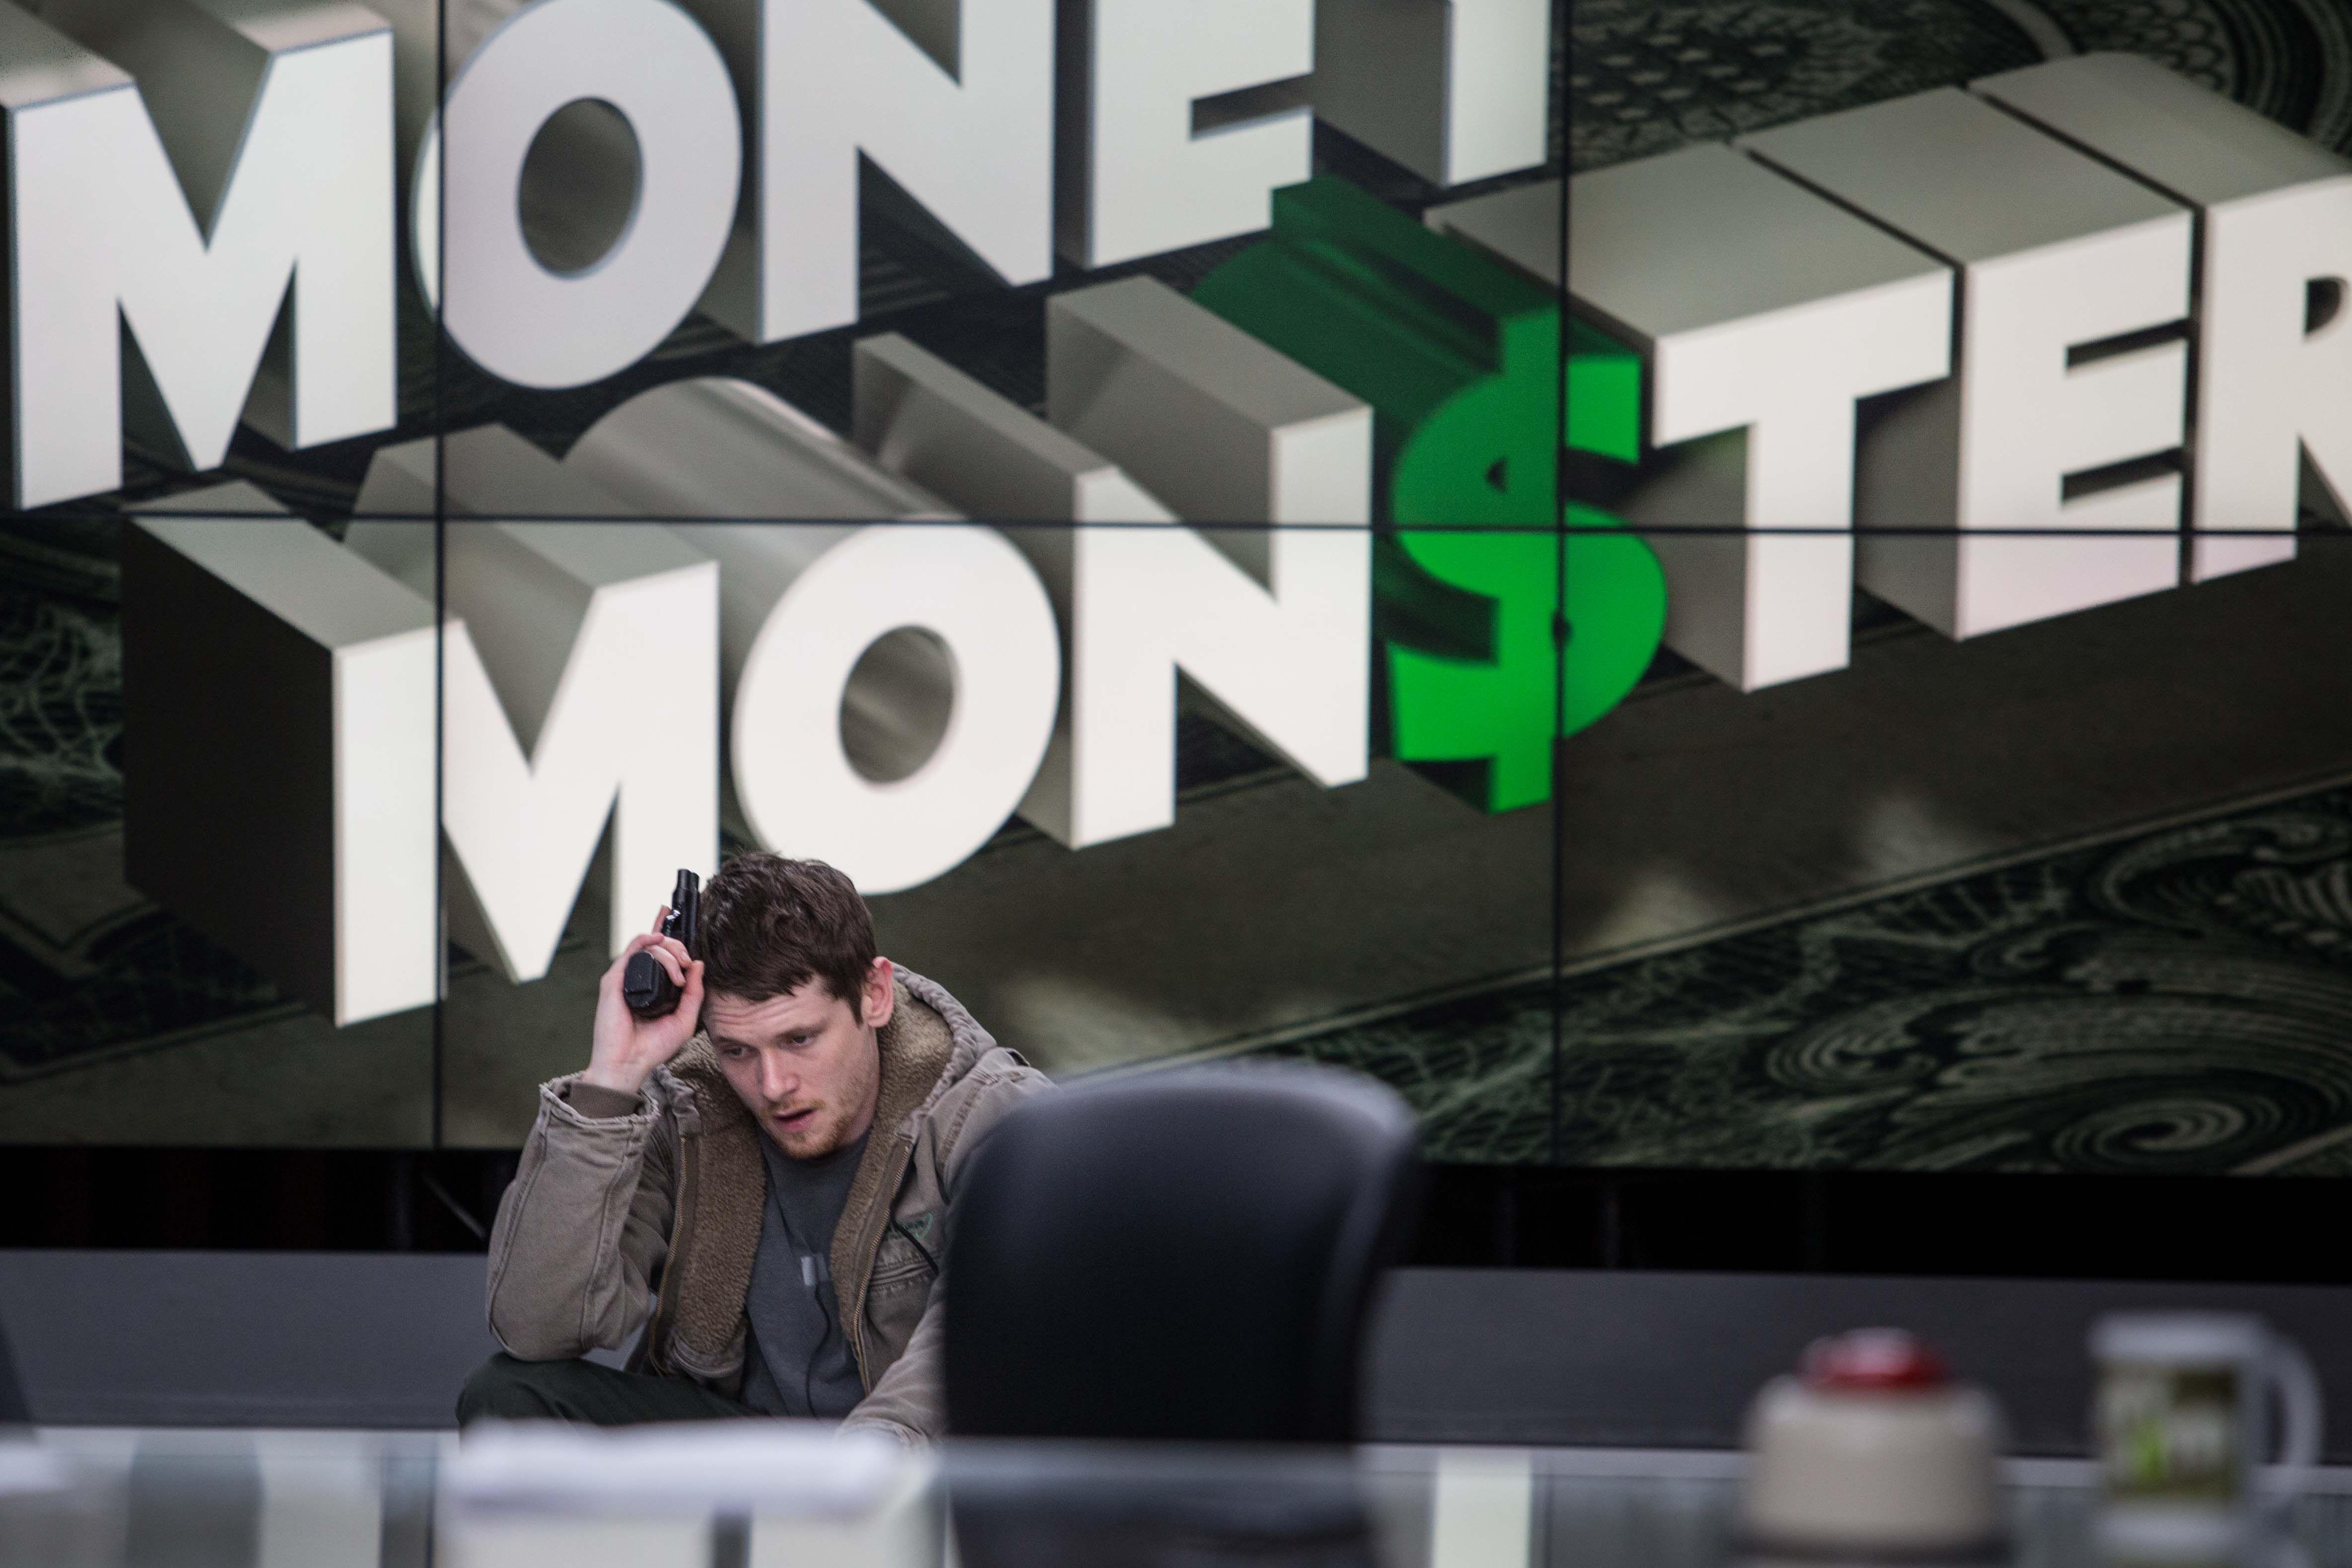 Amazing Money Monster Pictures & Backgrounds